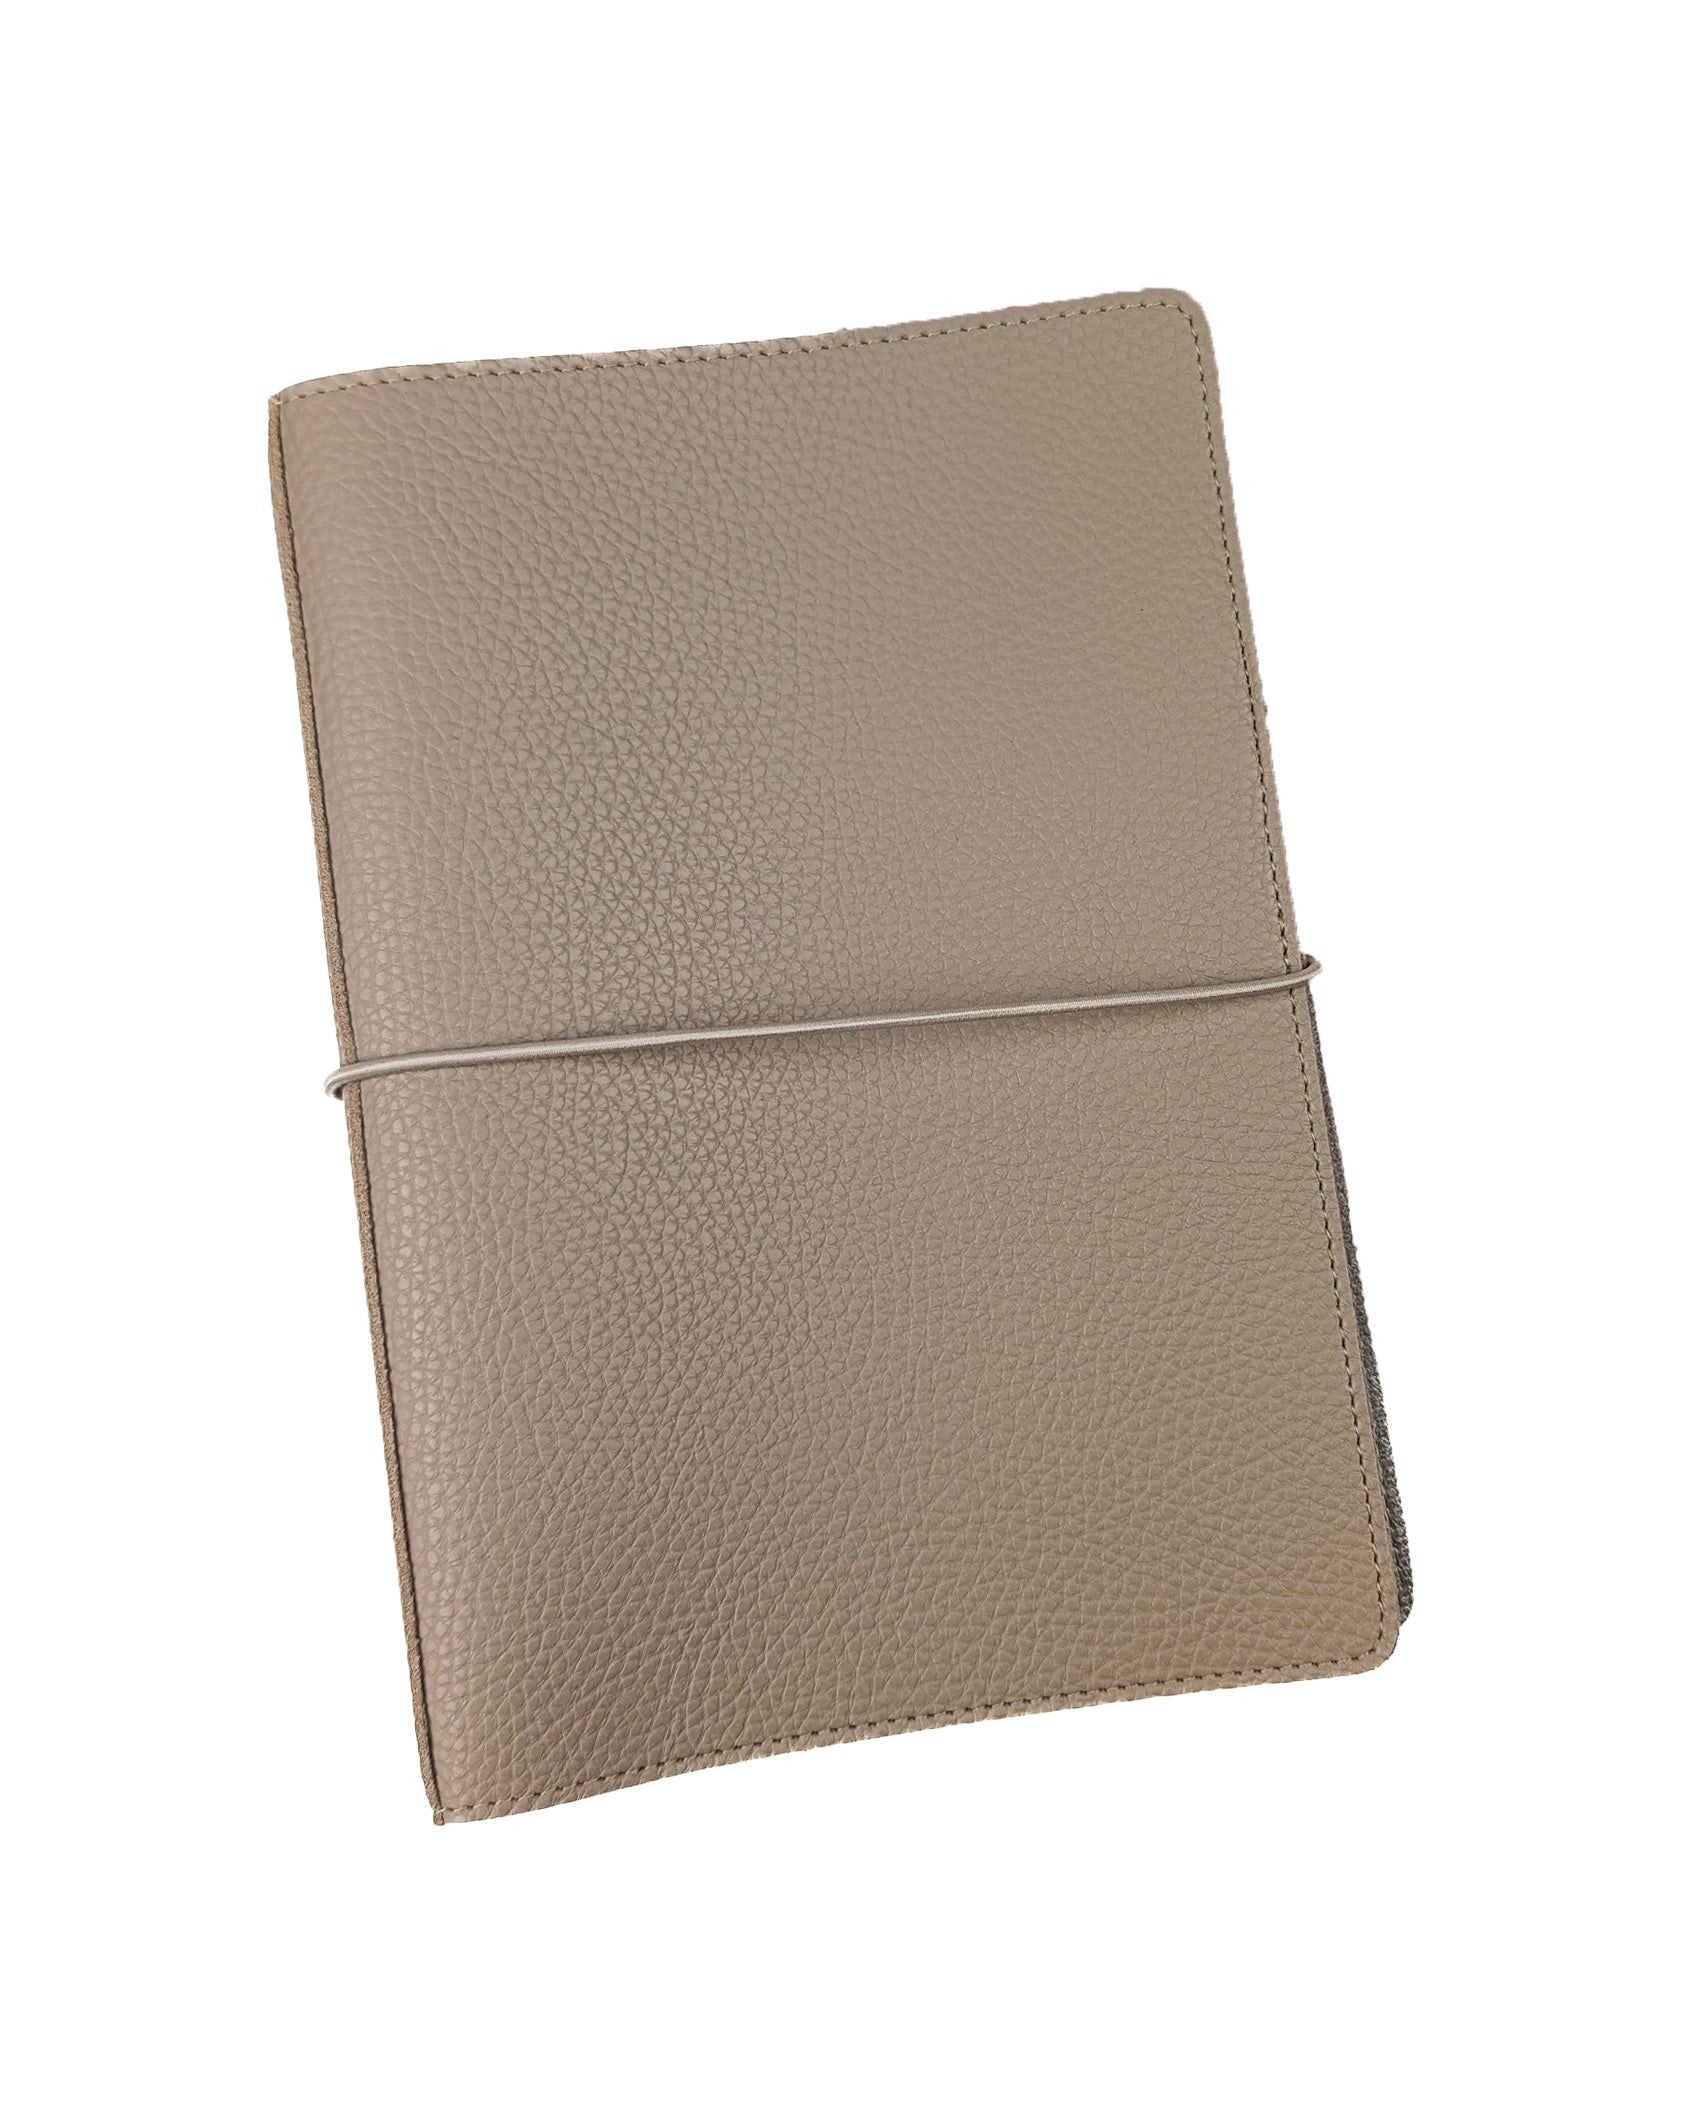 Beige Saddle Stiched Notebook Cover in half letter